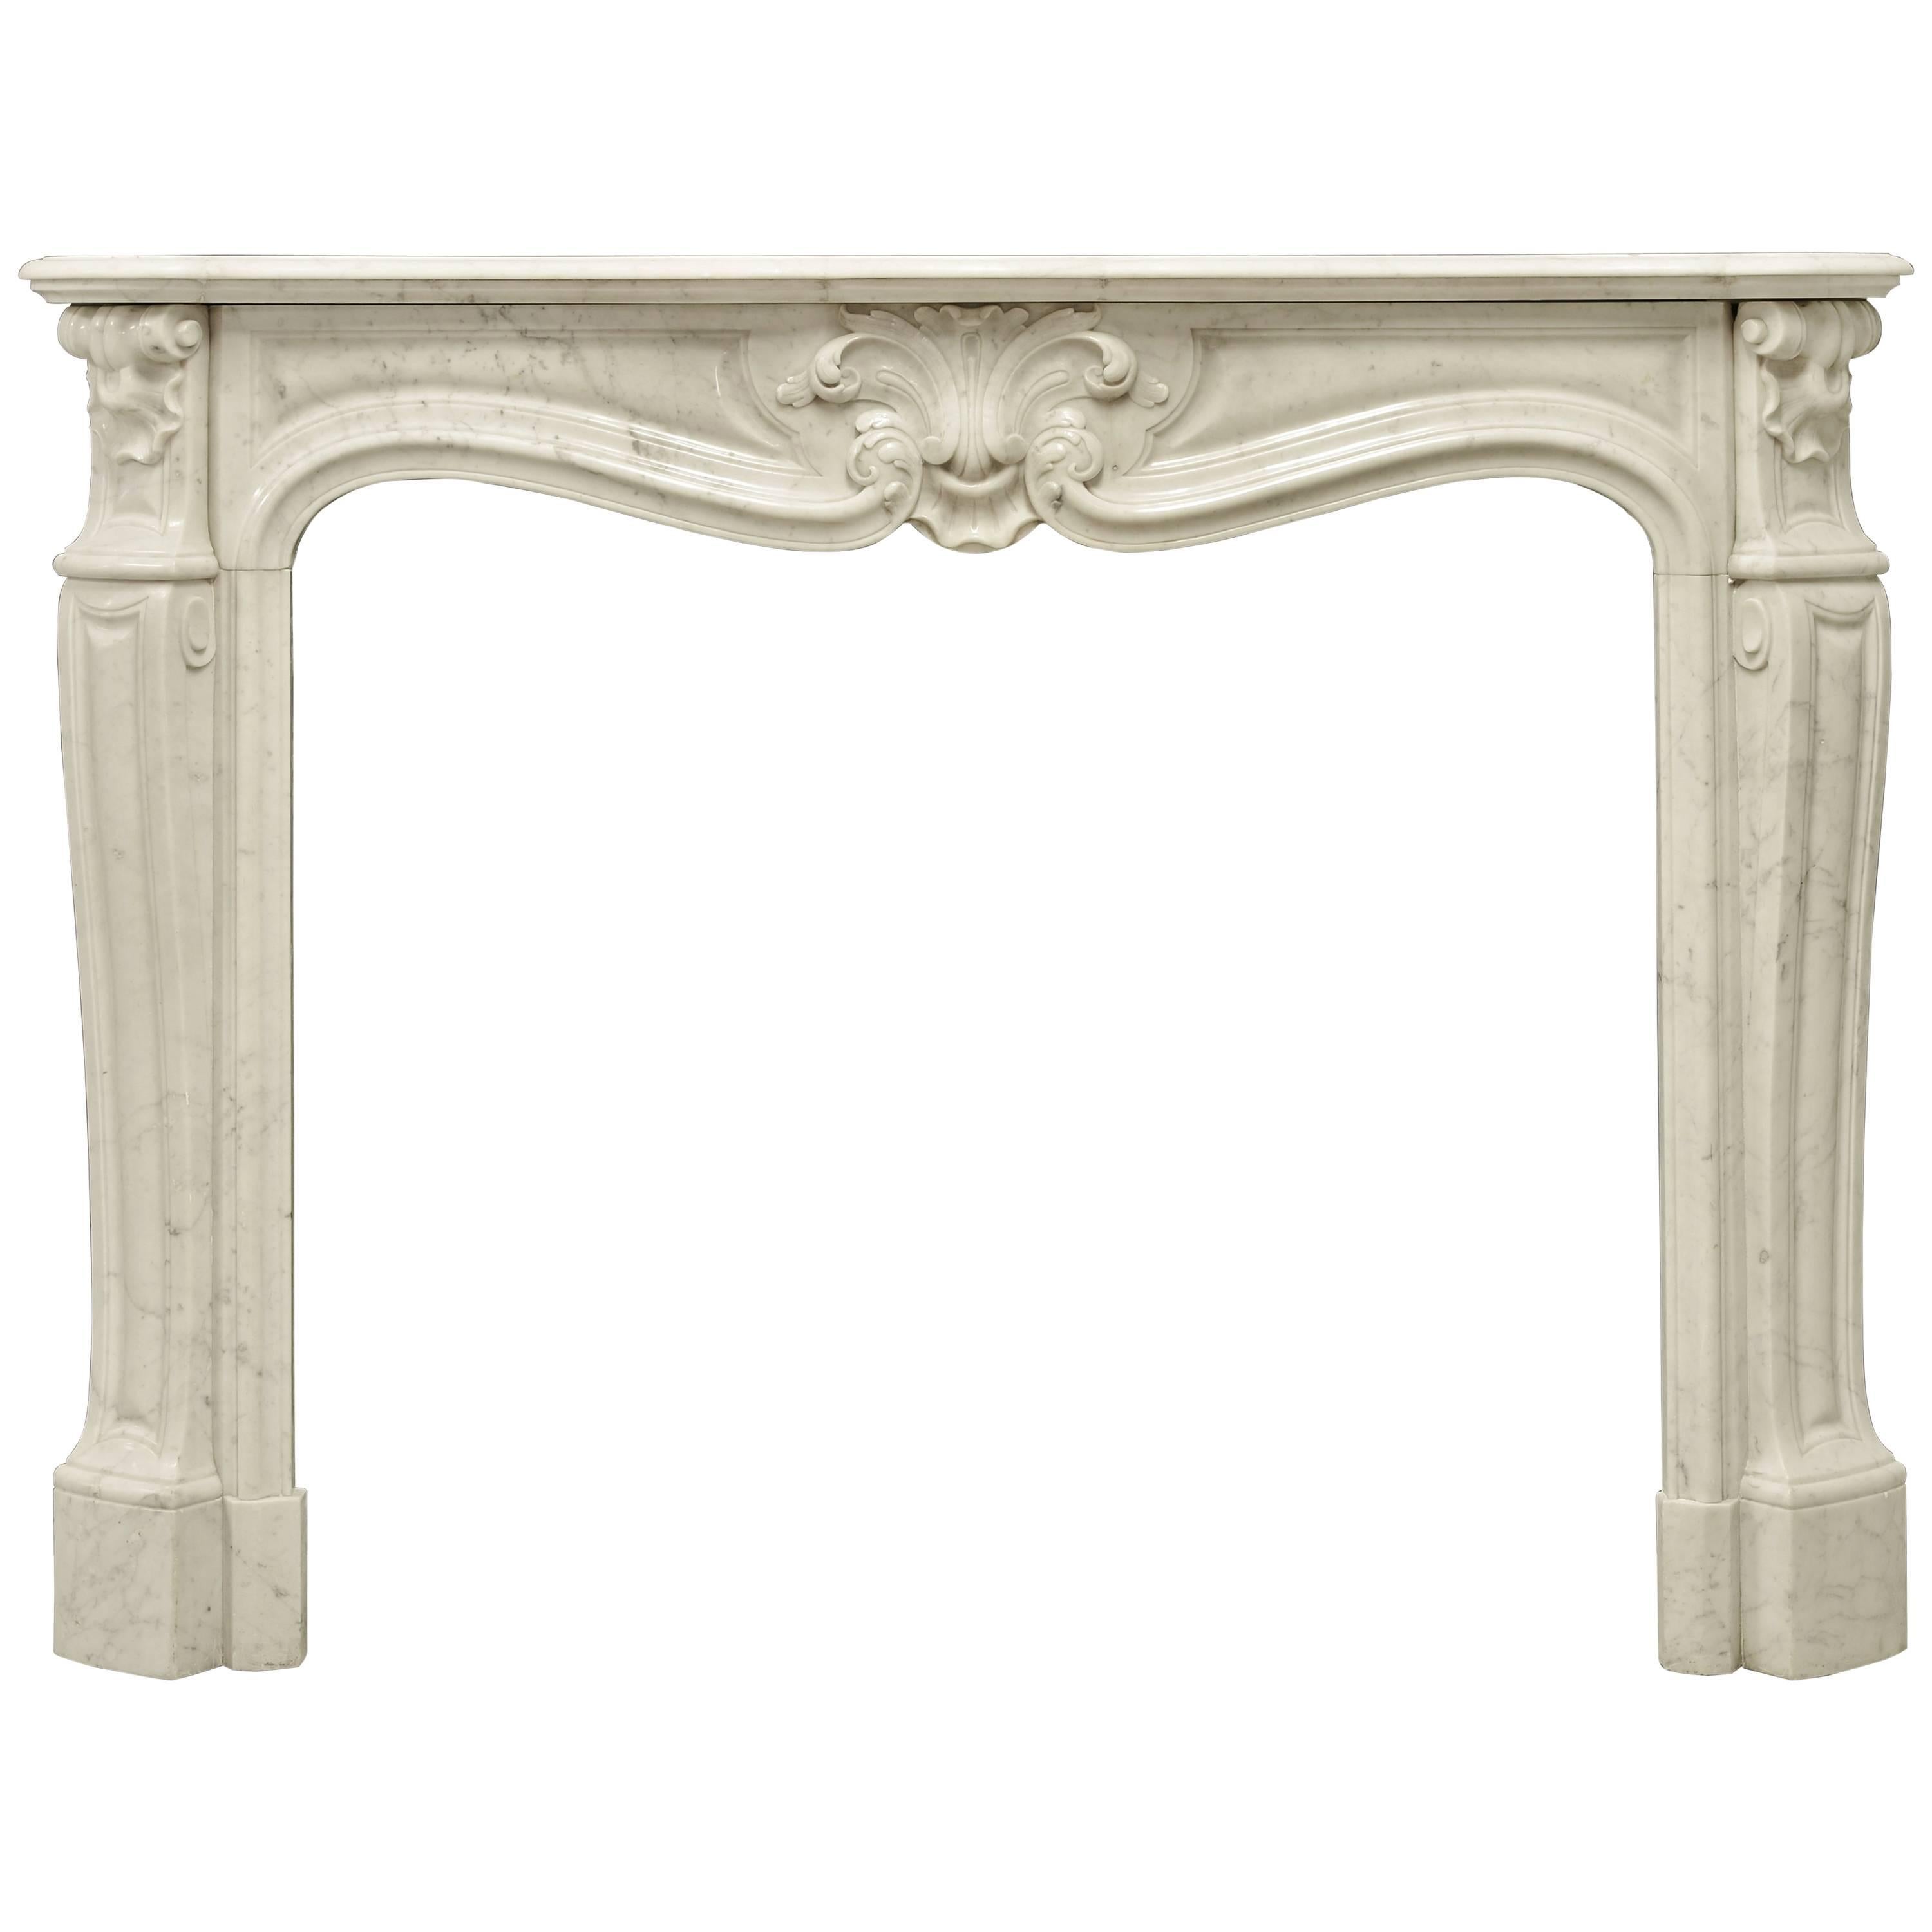 Antique Louis XV Style Fireplace Mantel in Carrara White Marble, 19th Century